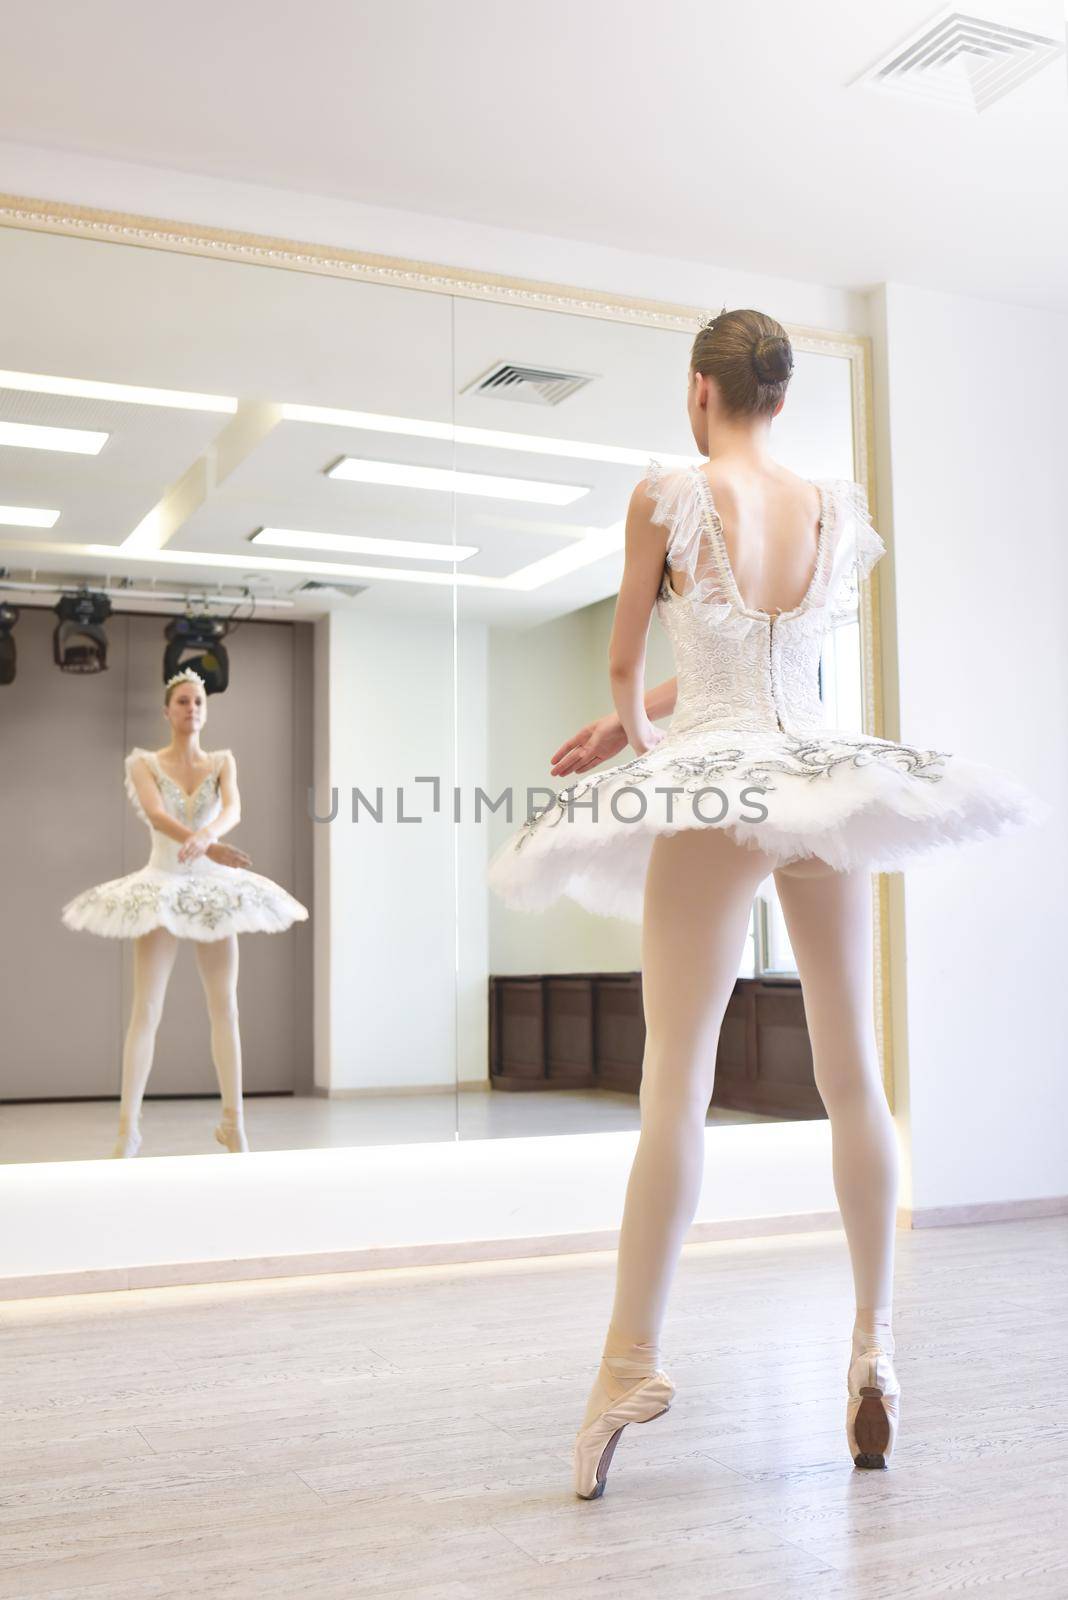 A young ballerina in a white tutu practicing in front of a mirror in the ballet studio by Nickstock